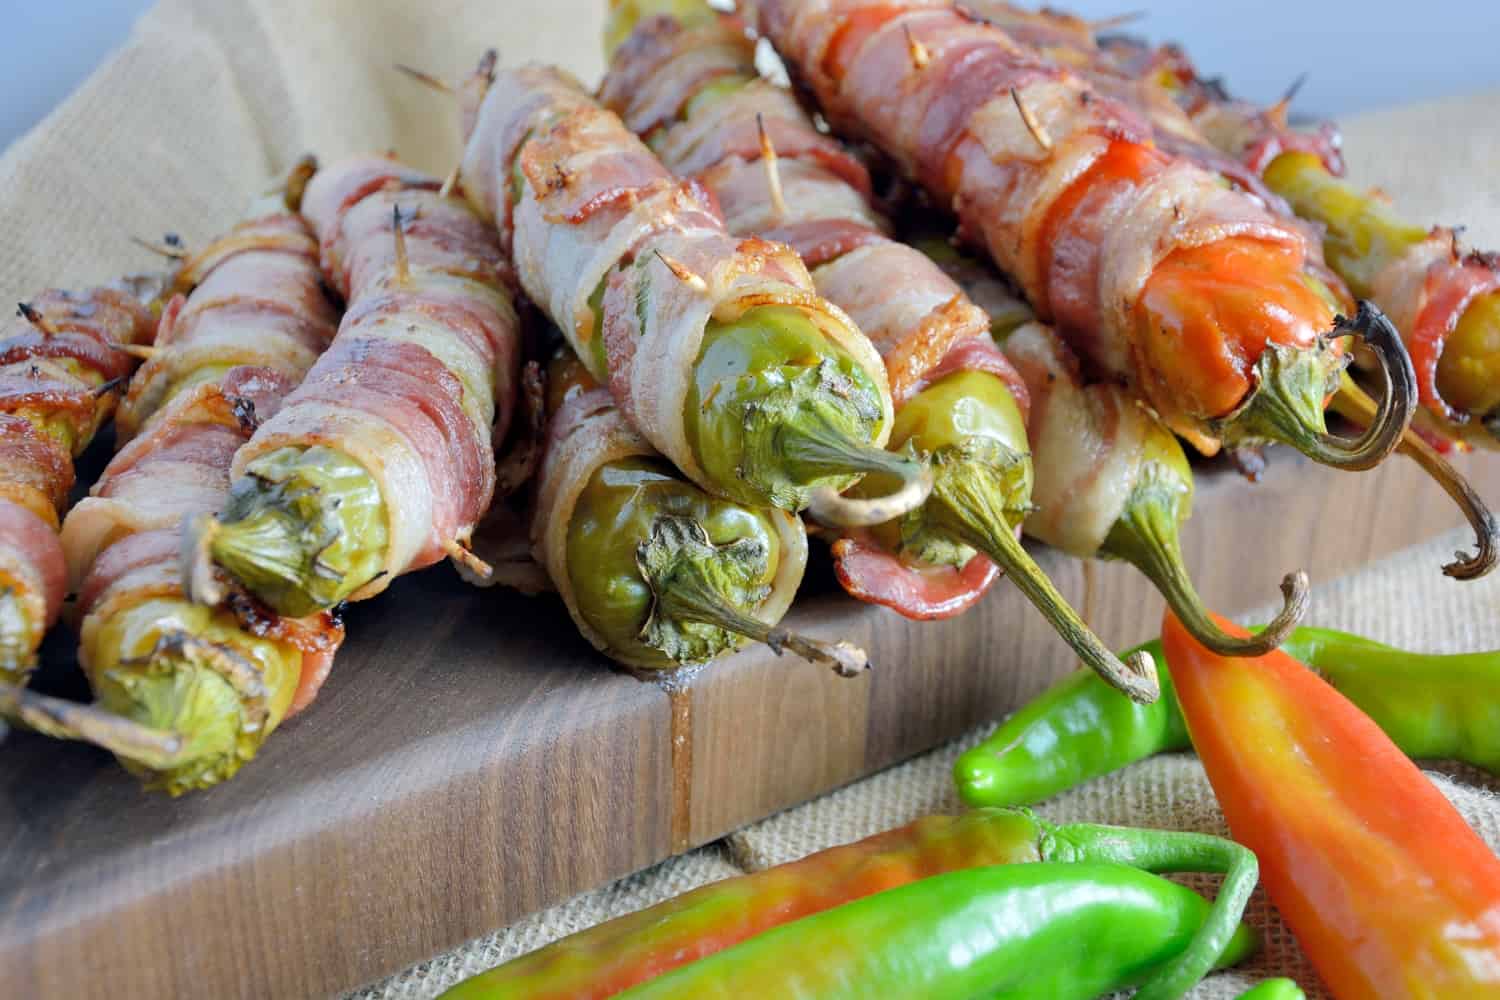 Bacon Wrapped BBQ Chicken Stuffed Chile Peppers Recipe- shredded chicken tossed in your choice of BBQ sauce and sharp cheddar cheese, stuffed into a large chile, wrapped in bacon and slow grilled. As seen on Fox News!